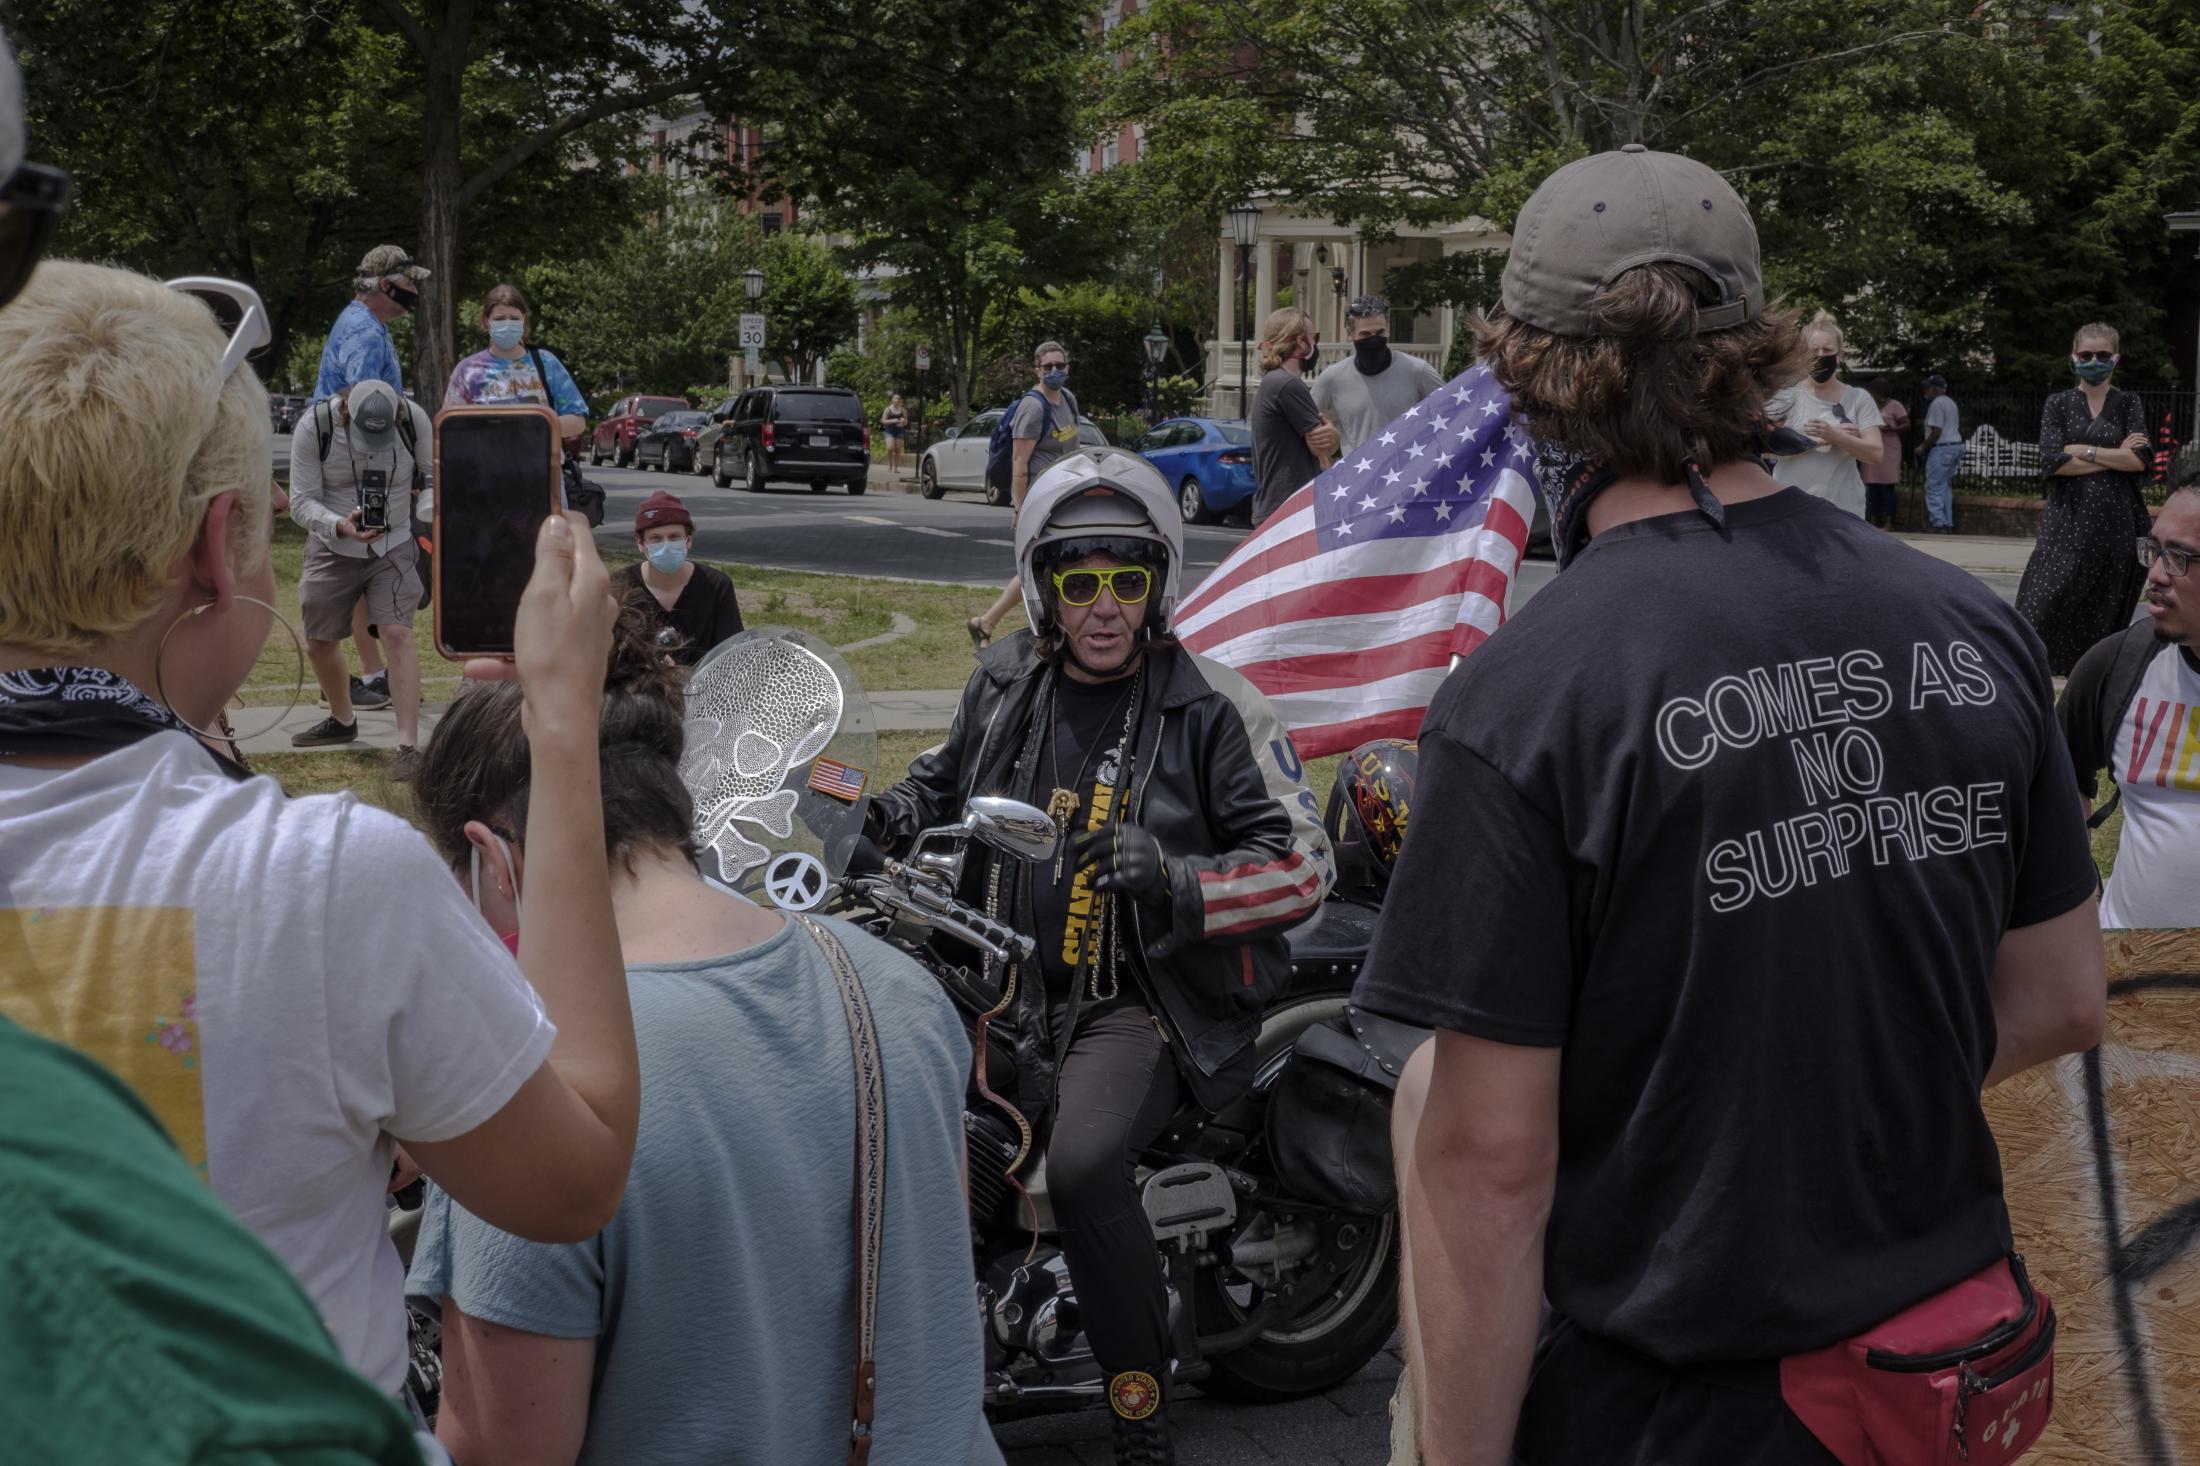 RICHMOND, VA - June 20, 2020: A man on a motorcycle carrying the United States flag arrives where people gather at the Robert E. Lee memorial and begins an altercation with supporters of the event. To celebrate the "Juneteenth," Richmond residents gather to honor those who have been killed by police officers and to protest police brutality on June 21, 2020 at Monument Avenue. The monument has been claimed by the community and has become a healing space where parents take photos with their children, play basketball and share a meal on the now proclaimed "Marcus-David Petters Circle". The Robert E. Lee memorial has been renamed in honor of the young Marcus-David Petters, who was shot and killed by a Richmond police officer on May 14, 2018. Photo: Carlos Bernate for The New York Times.